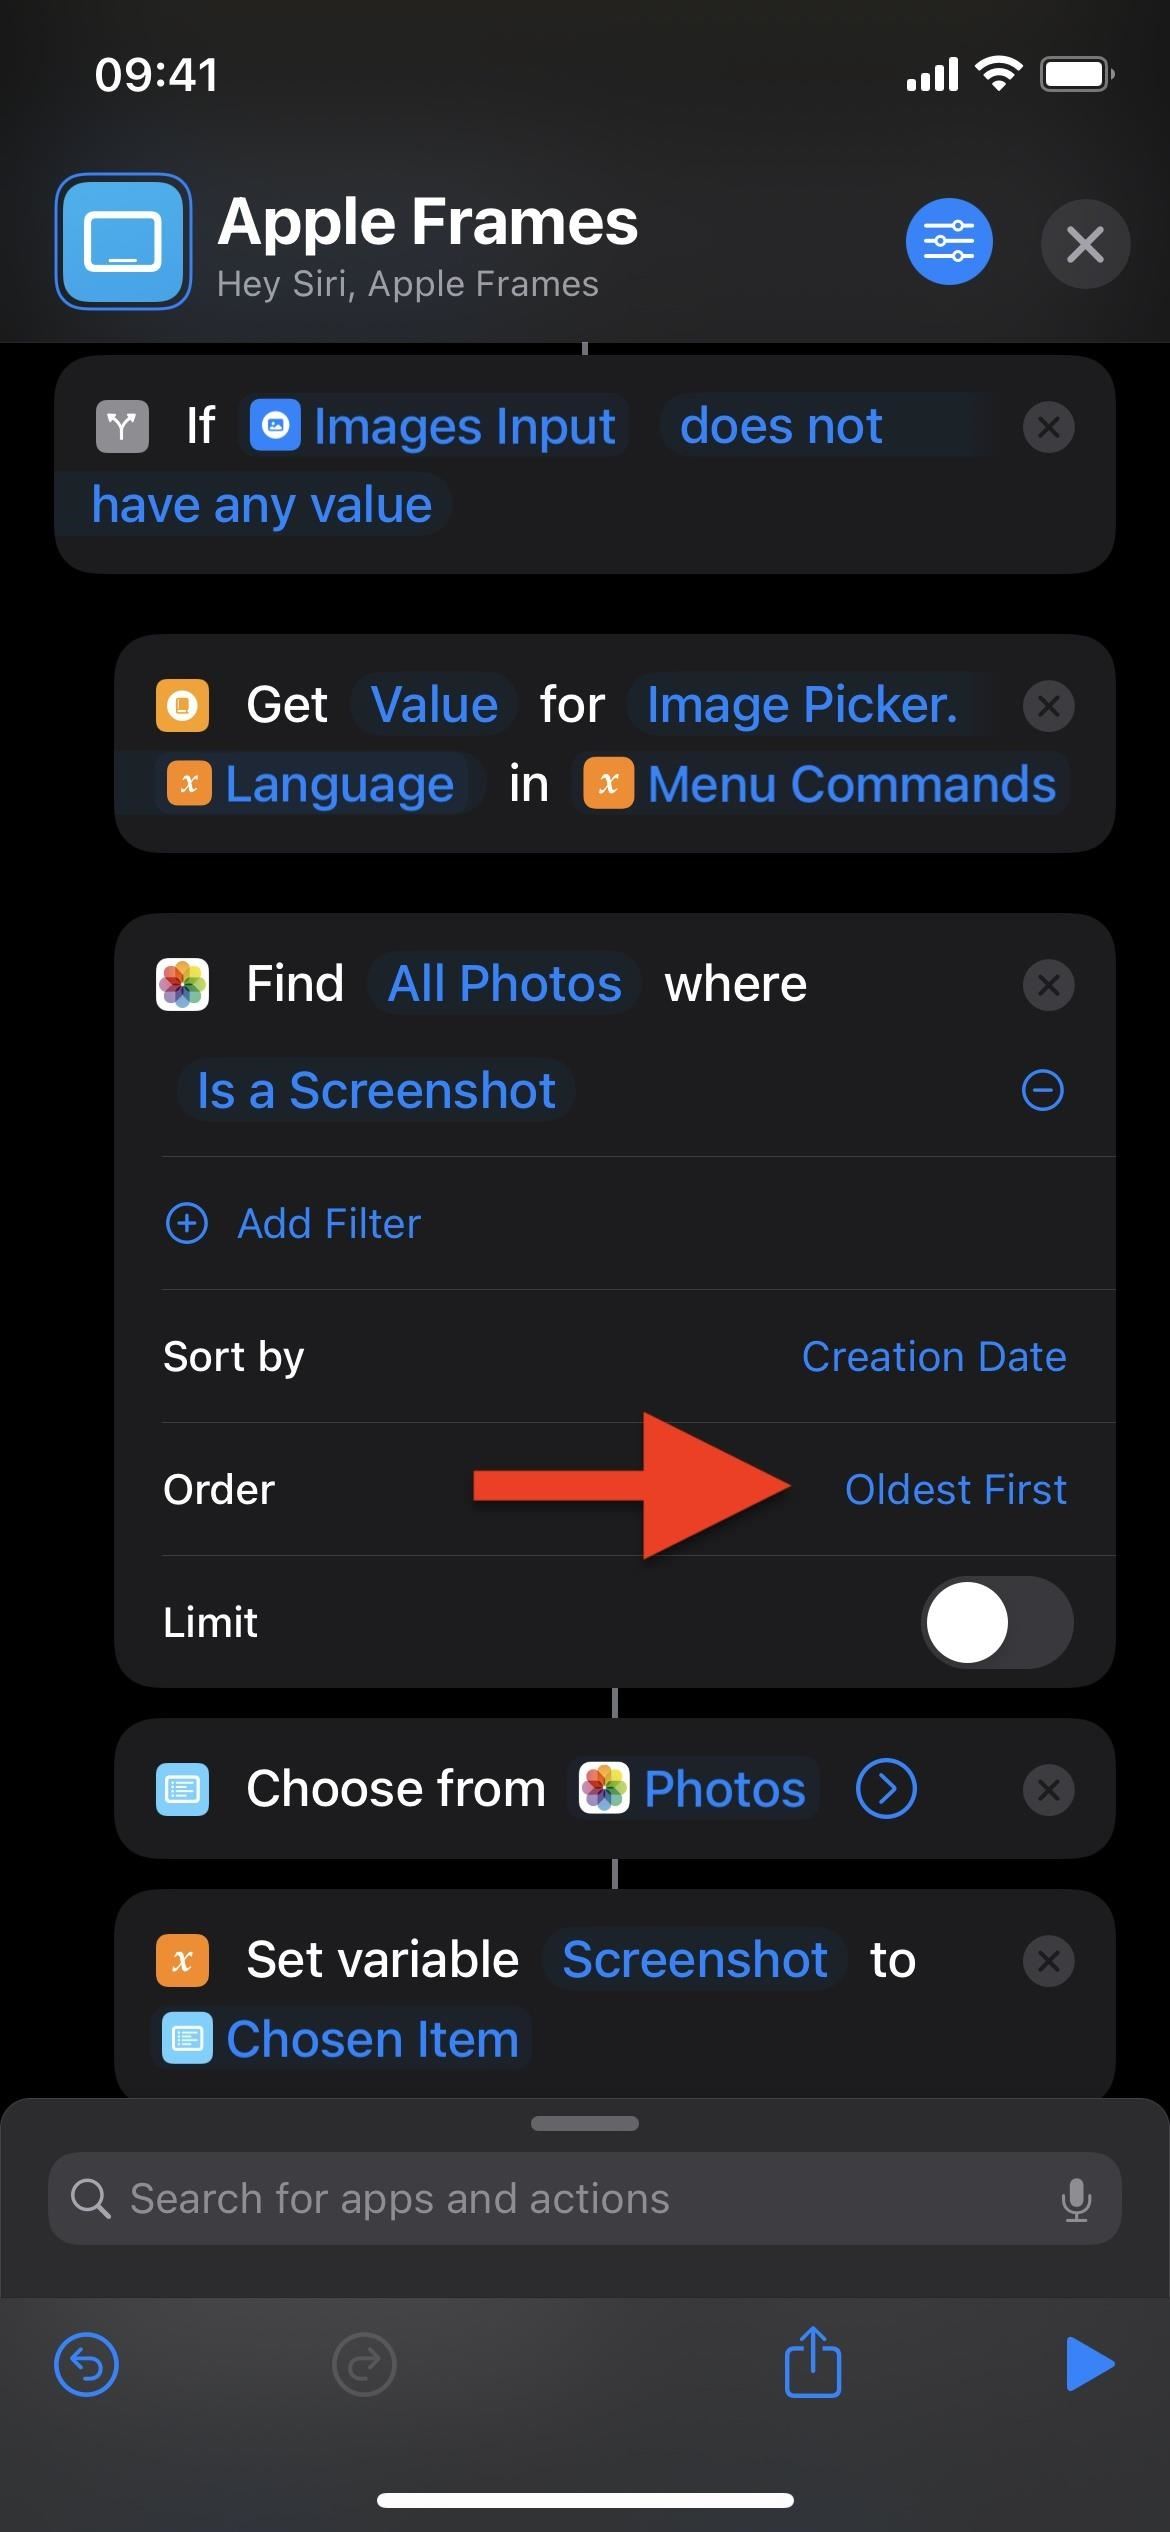 Upgrade Your Screenshots by Framing Them with Your iPhone or iPad's Body — No Third-Party App Needed